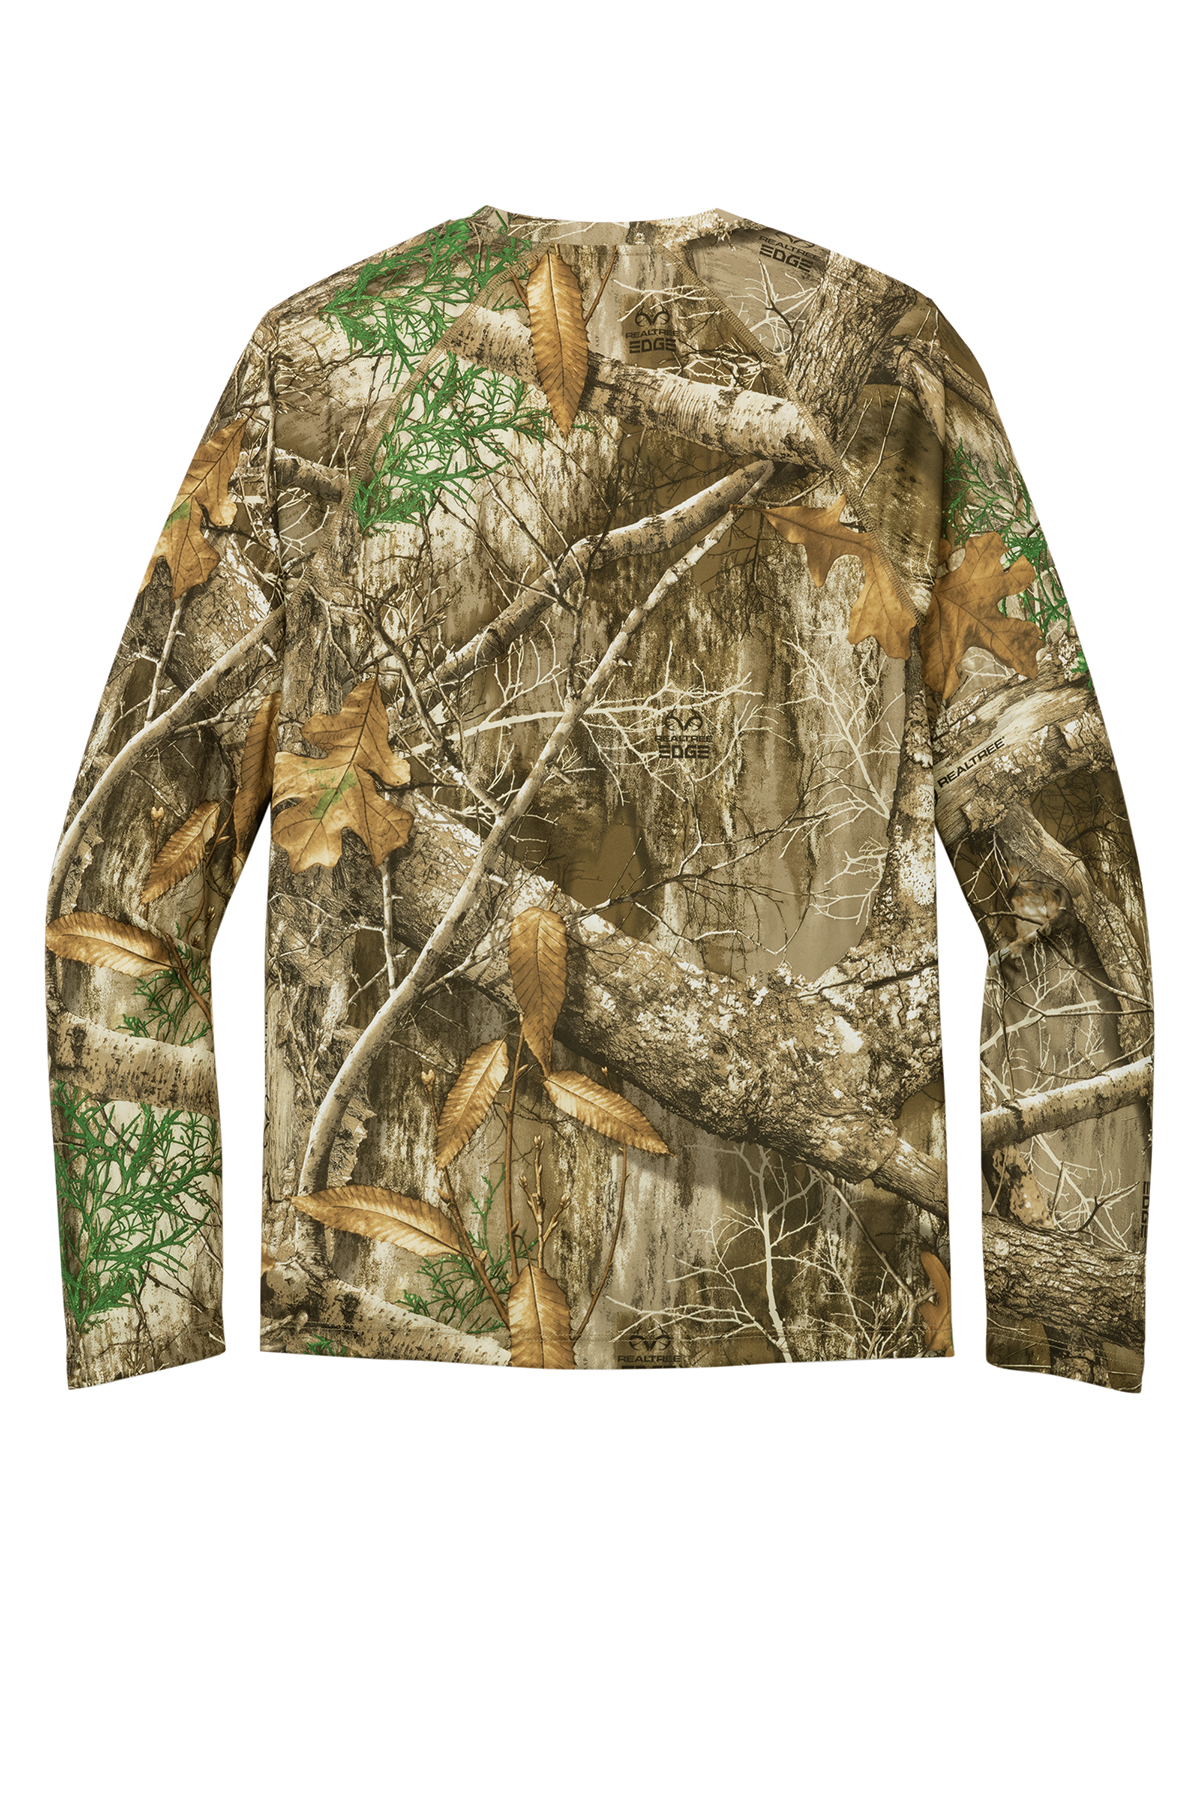 Russell Outdoors Realtree Performance Long Sleeve Tee | Product | SanMar